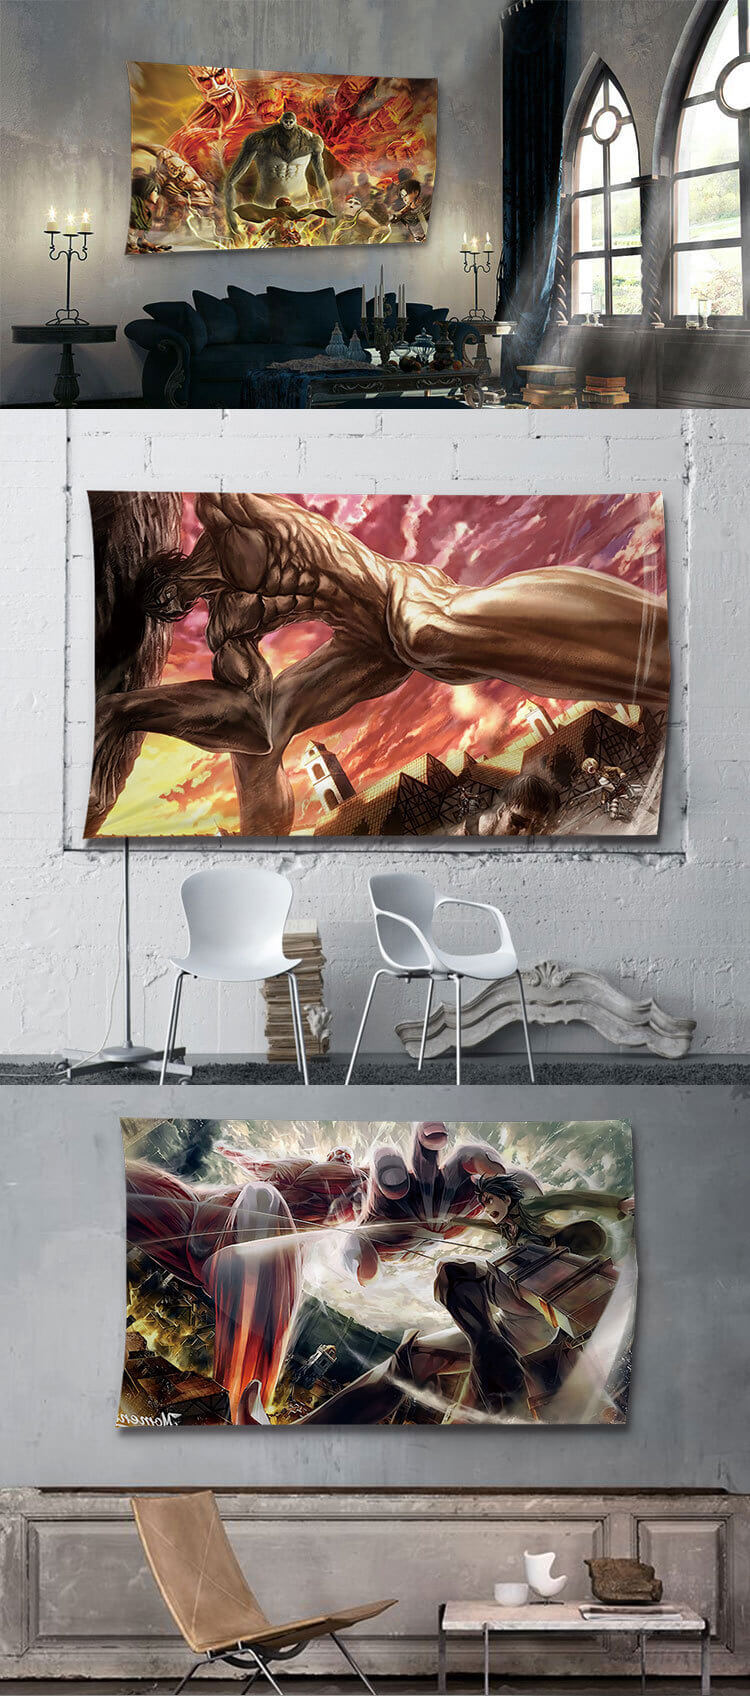 Attack on Titan Wall Hanging Tapestry Wall Décor